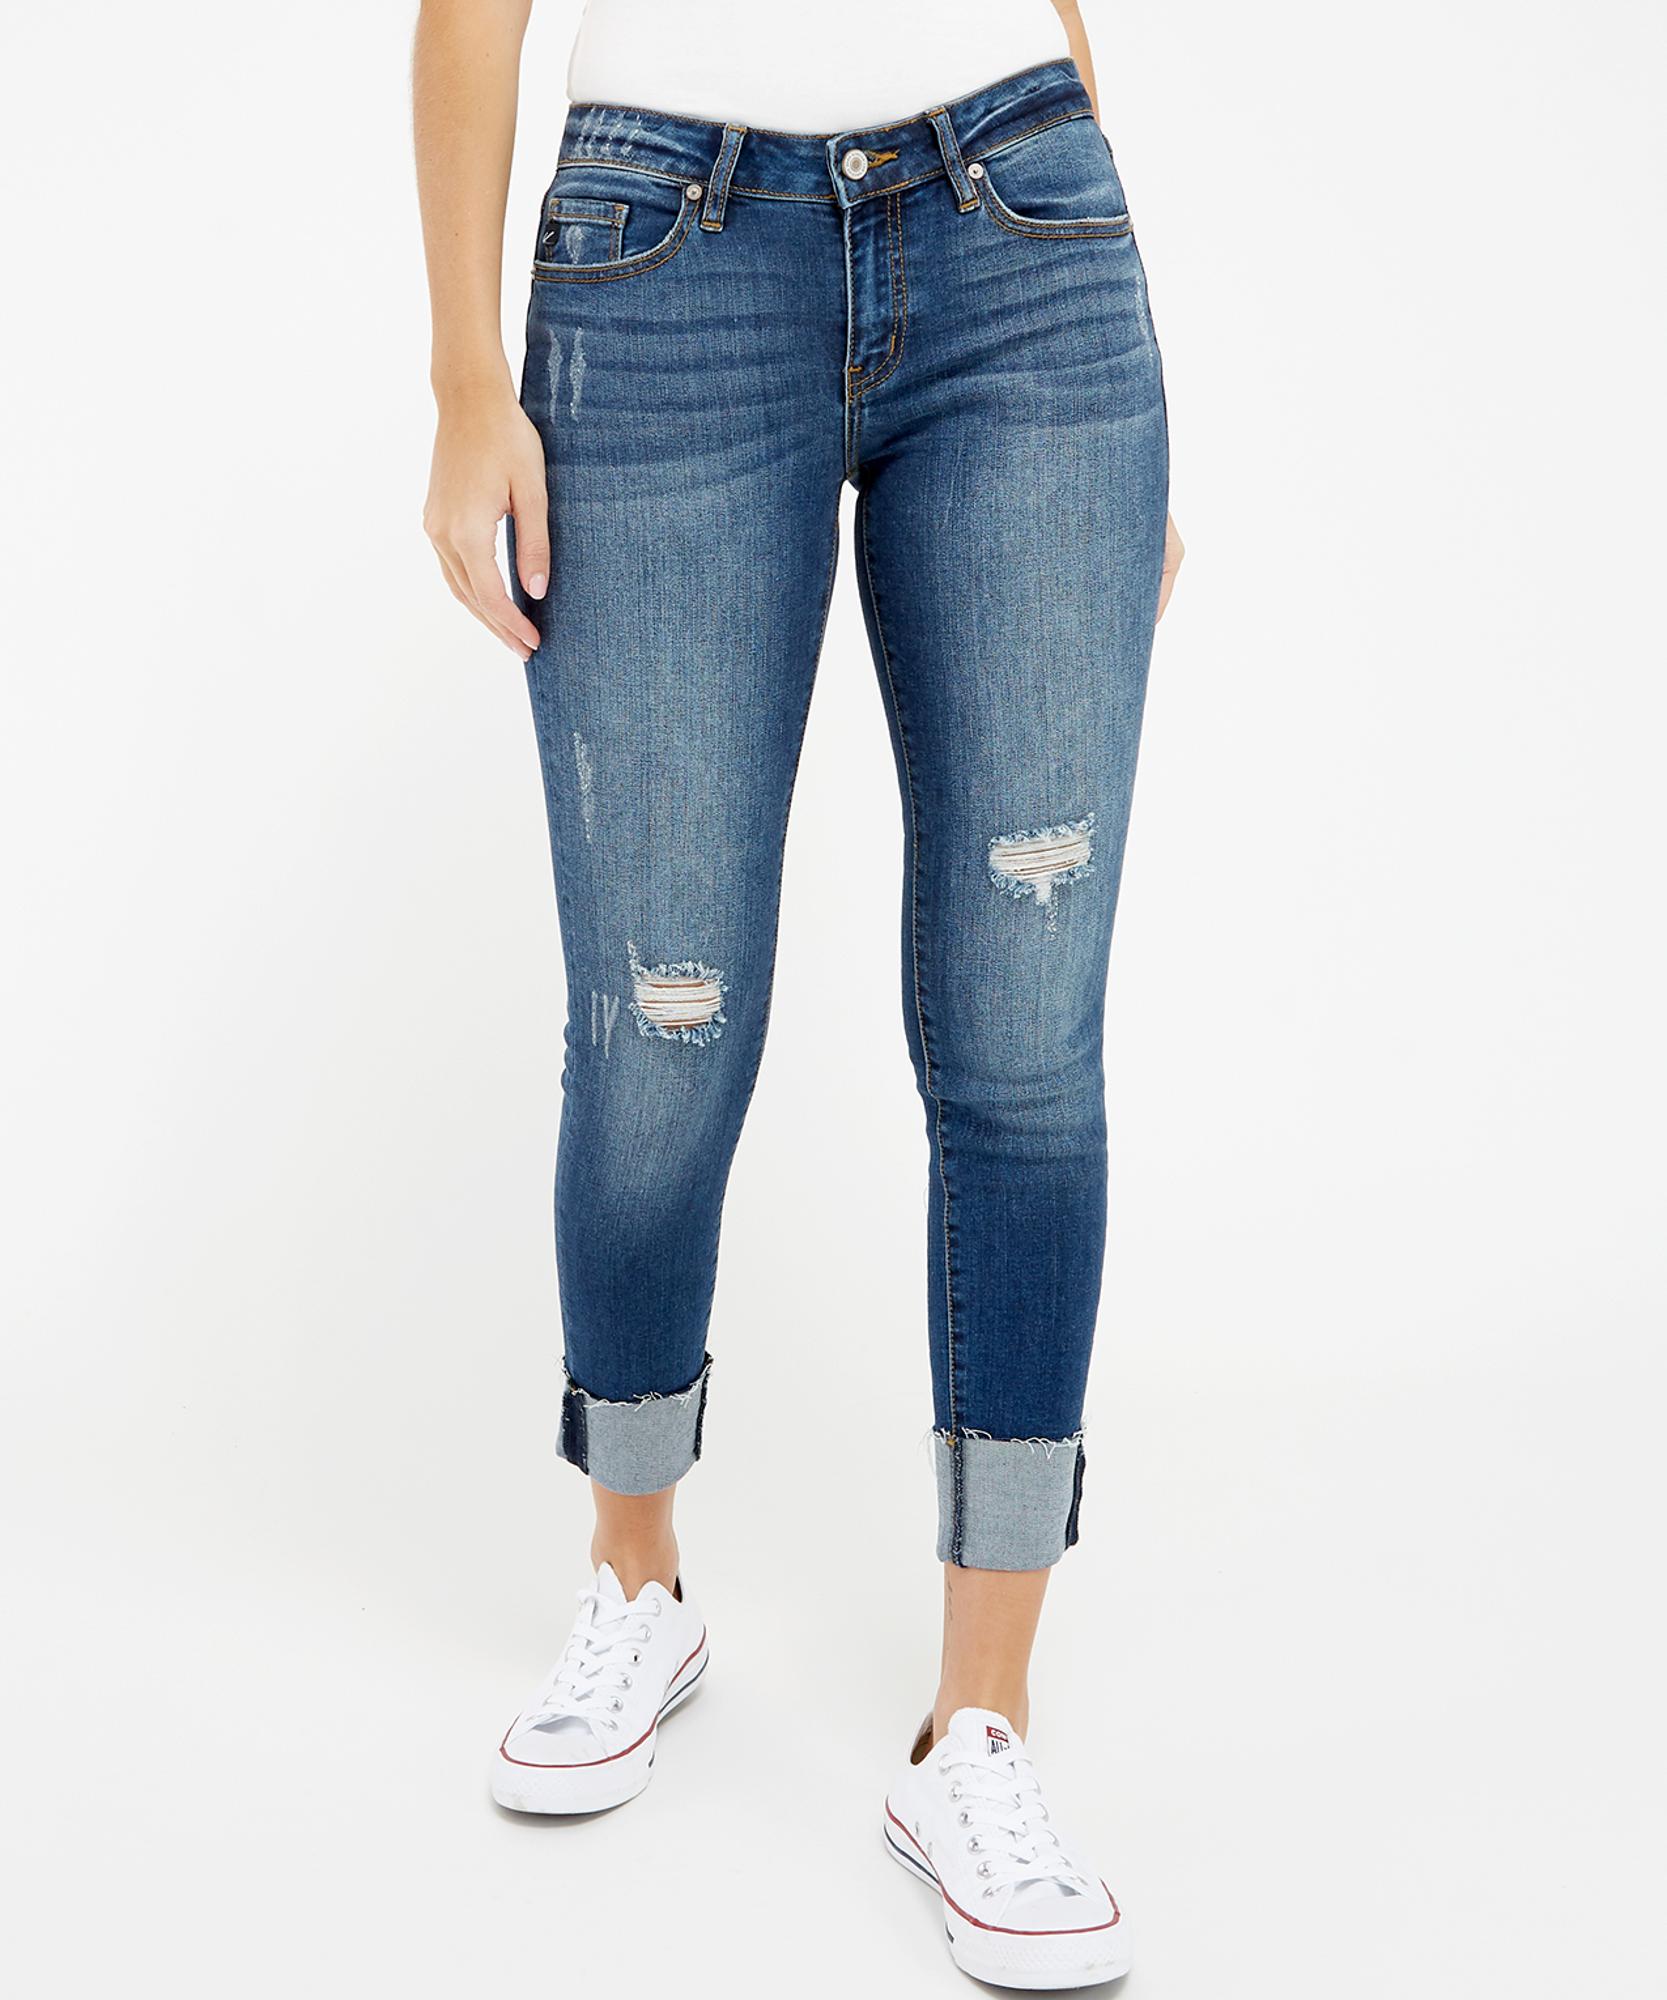 Gemma Low Rise Ankle Skinny Jeans